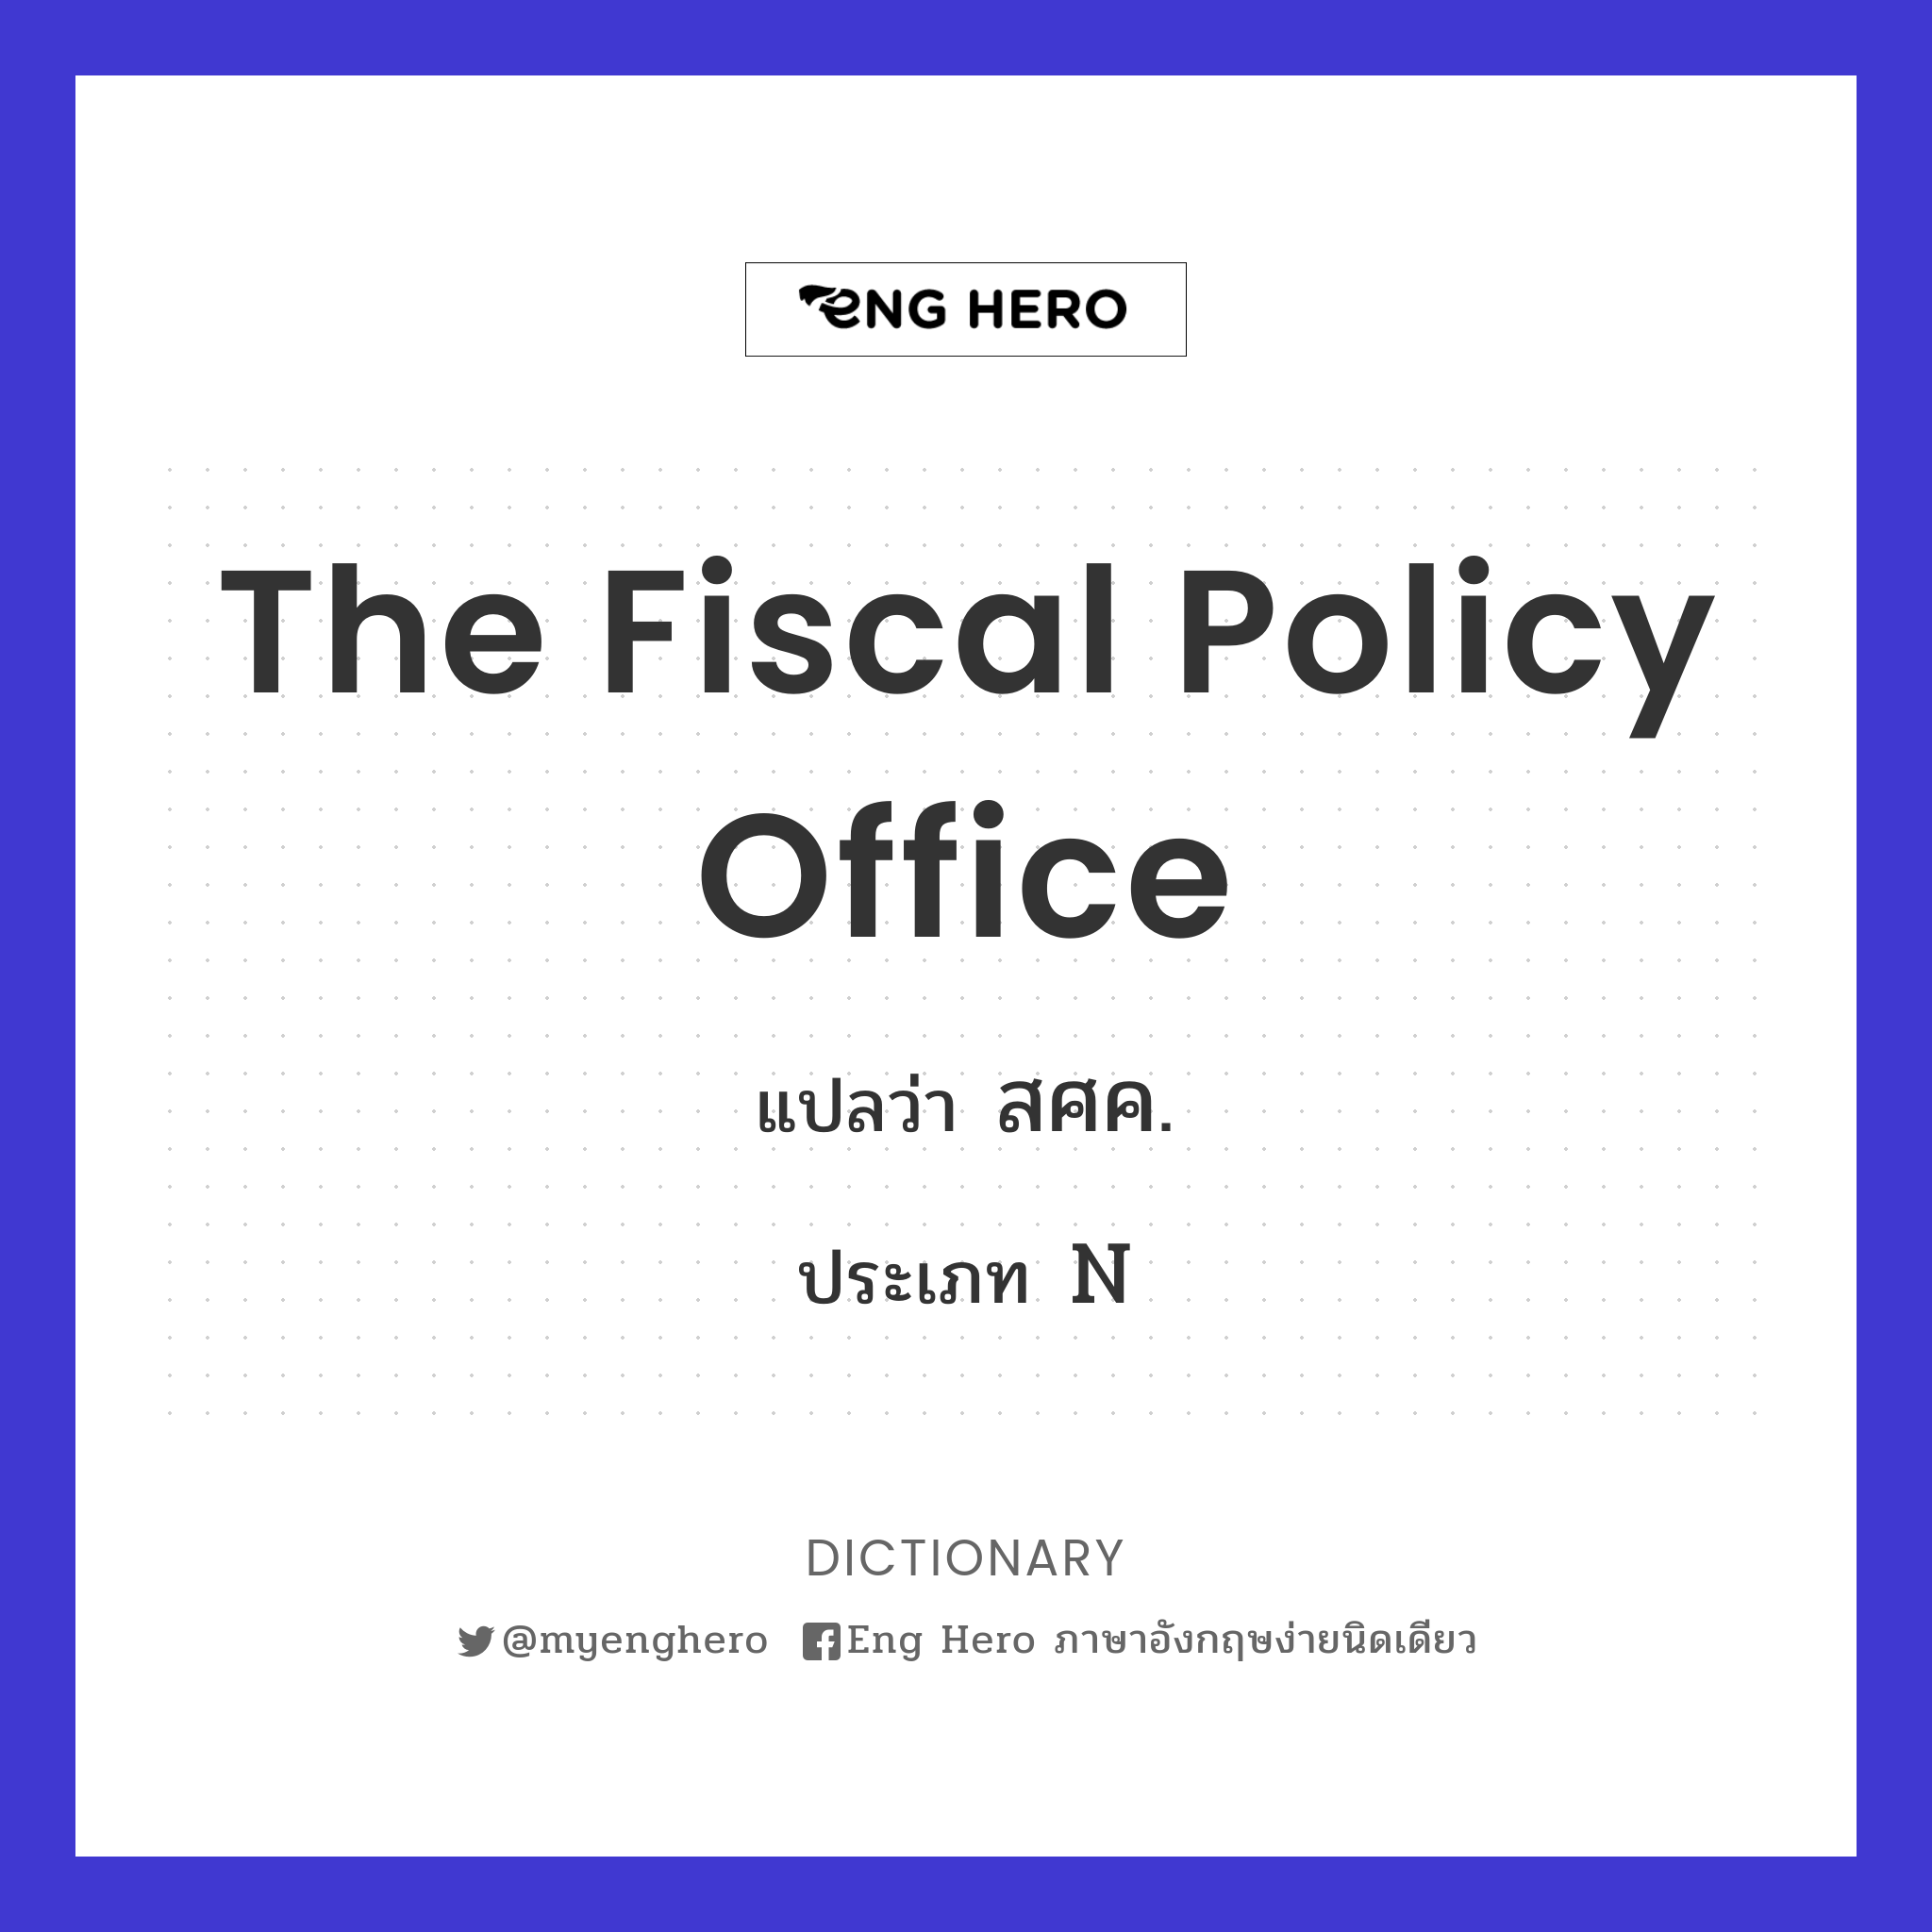 The Fiscal Policy Office